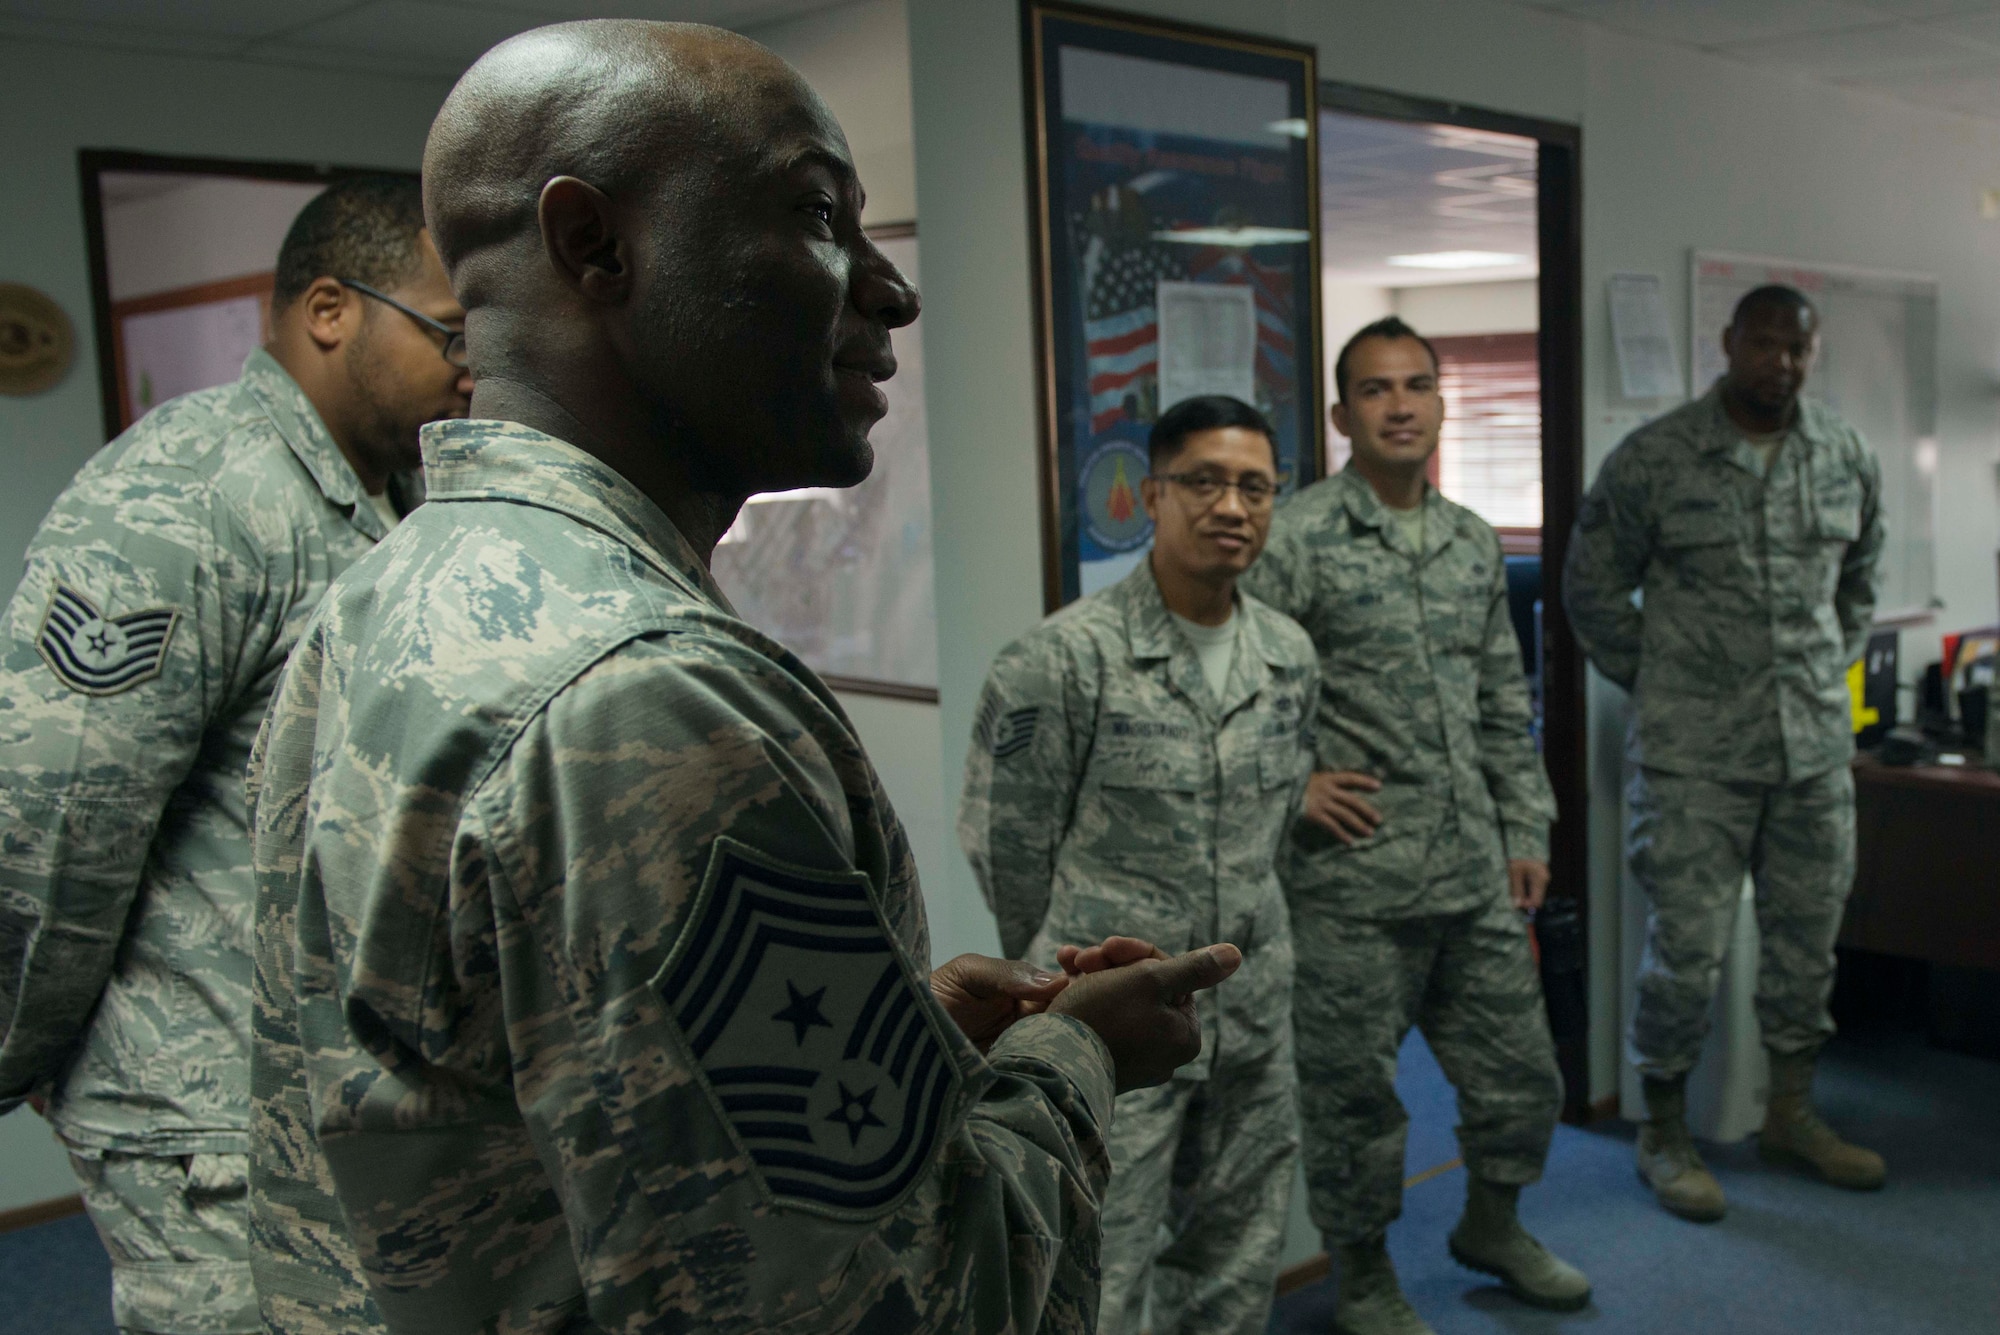 U.S. Air Force Chief Master Sgt. Vegas Clark, 39th Air Base Wing command chief, speaks to 39th Civil Engineer Squadron Airmen during a visit, April 25, 2016, at Incirlik Air Base, Turkey. The visit allowed wing leadership to meet with Airmen from different sections to learn more about the daily operations they perform. (U.S. Air Force photo by Senior Airman John Nieves Camacho/Released)